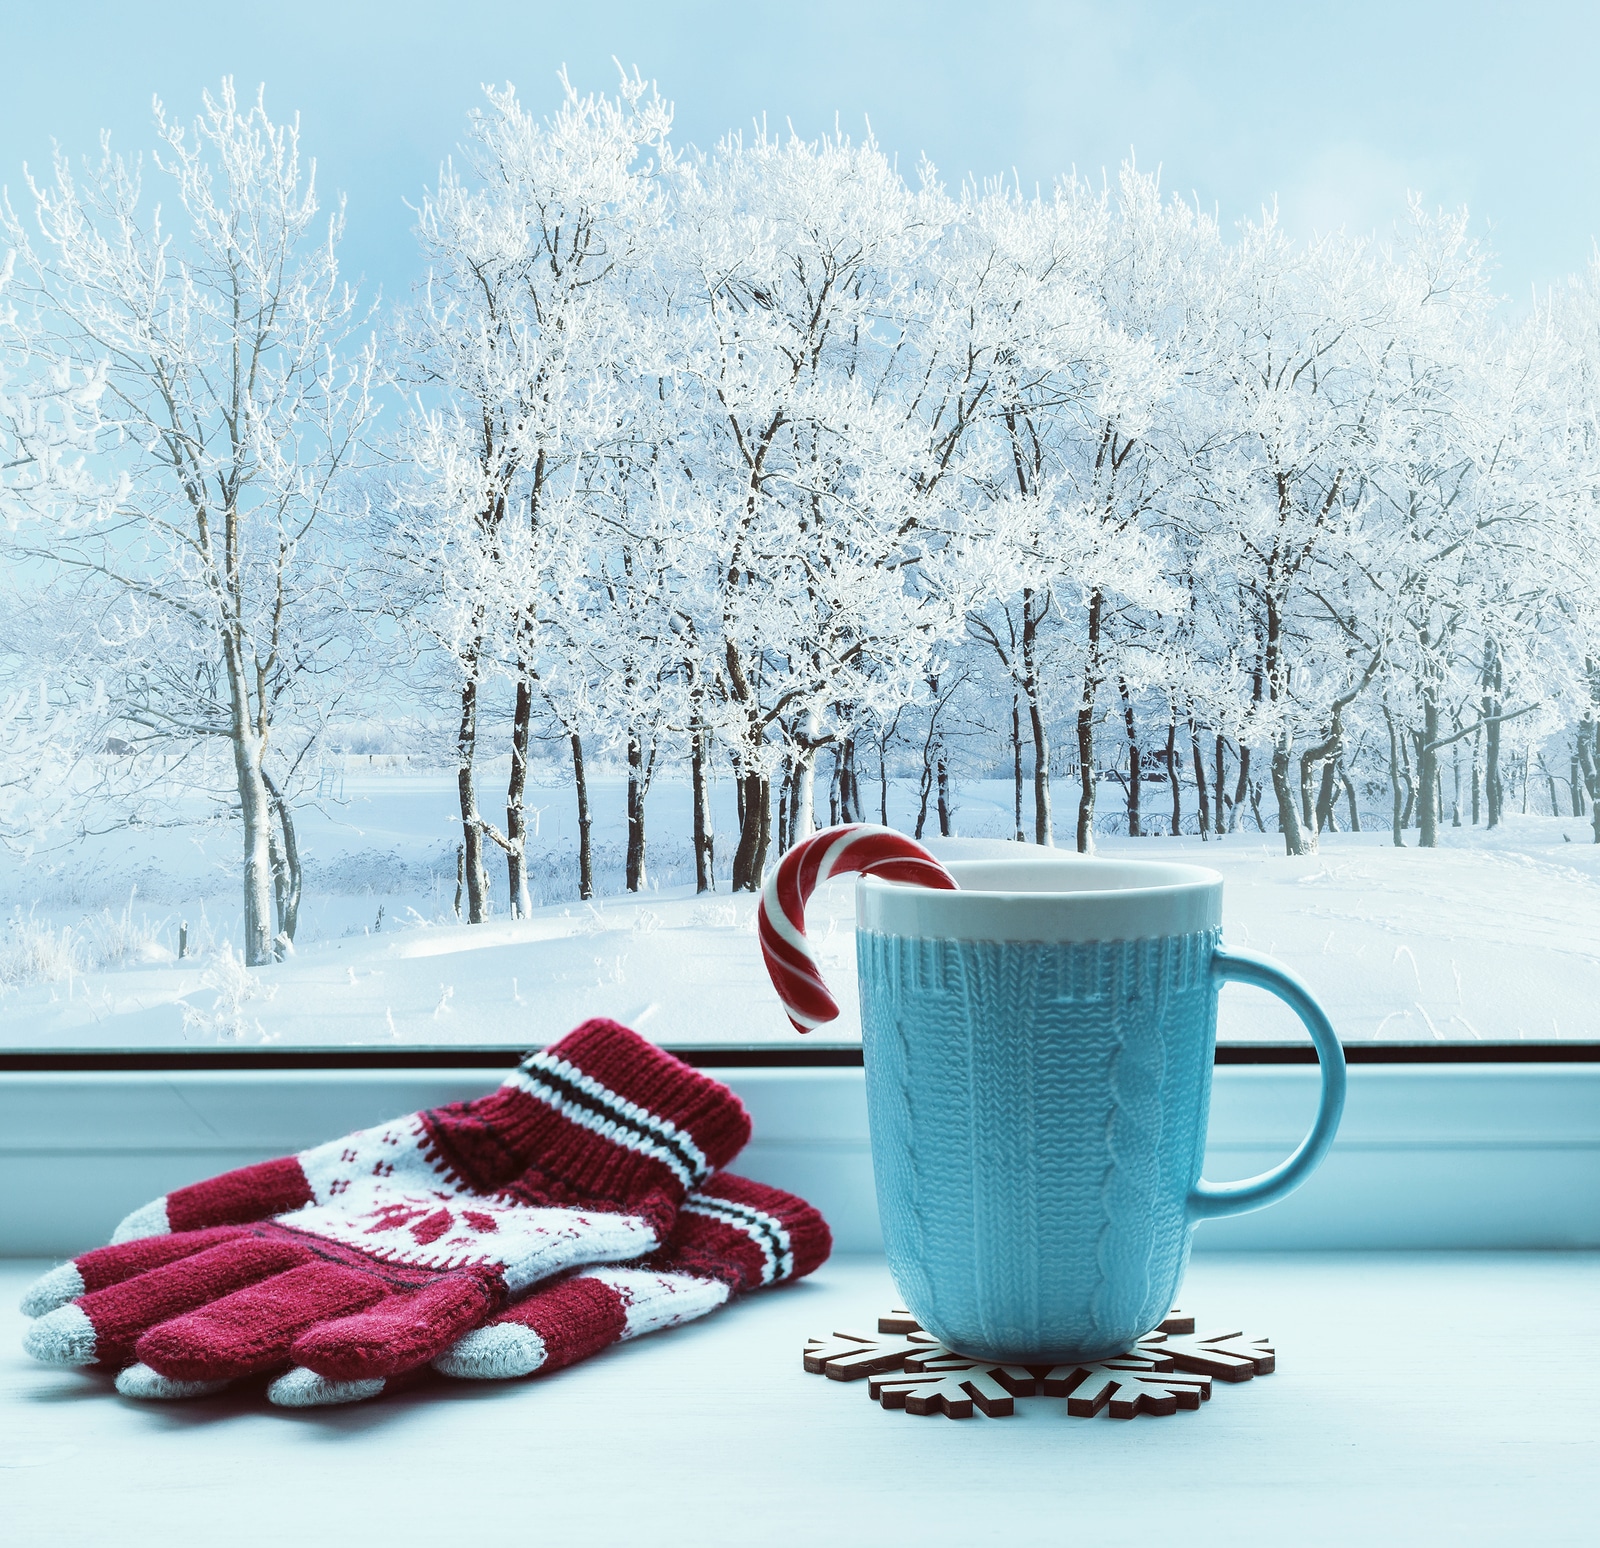 A snowy scene with a cup of cocoa and mittens to represent the slow holiday season many therapists and small business owners see. Focusing on learning search engine optimization can be a great way to use the slow time this winter!